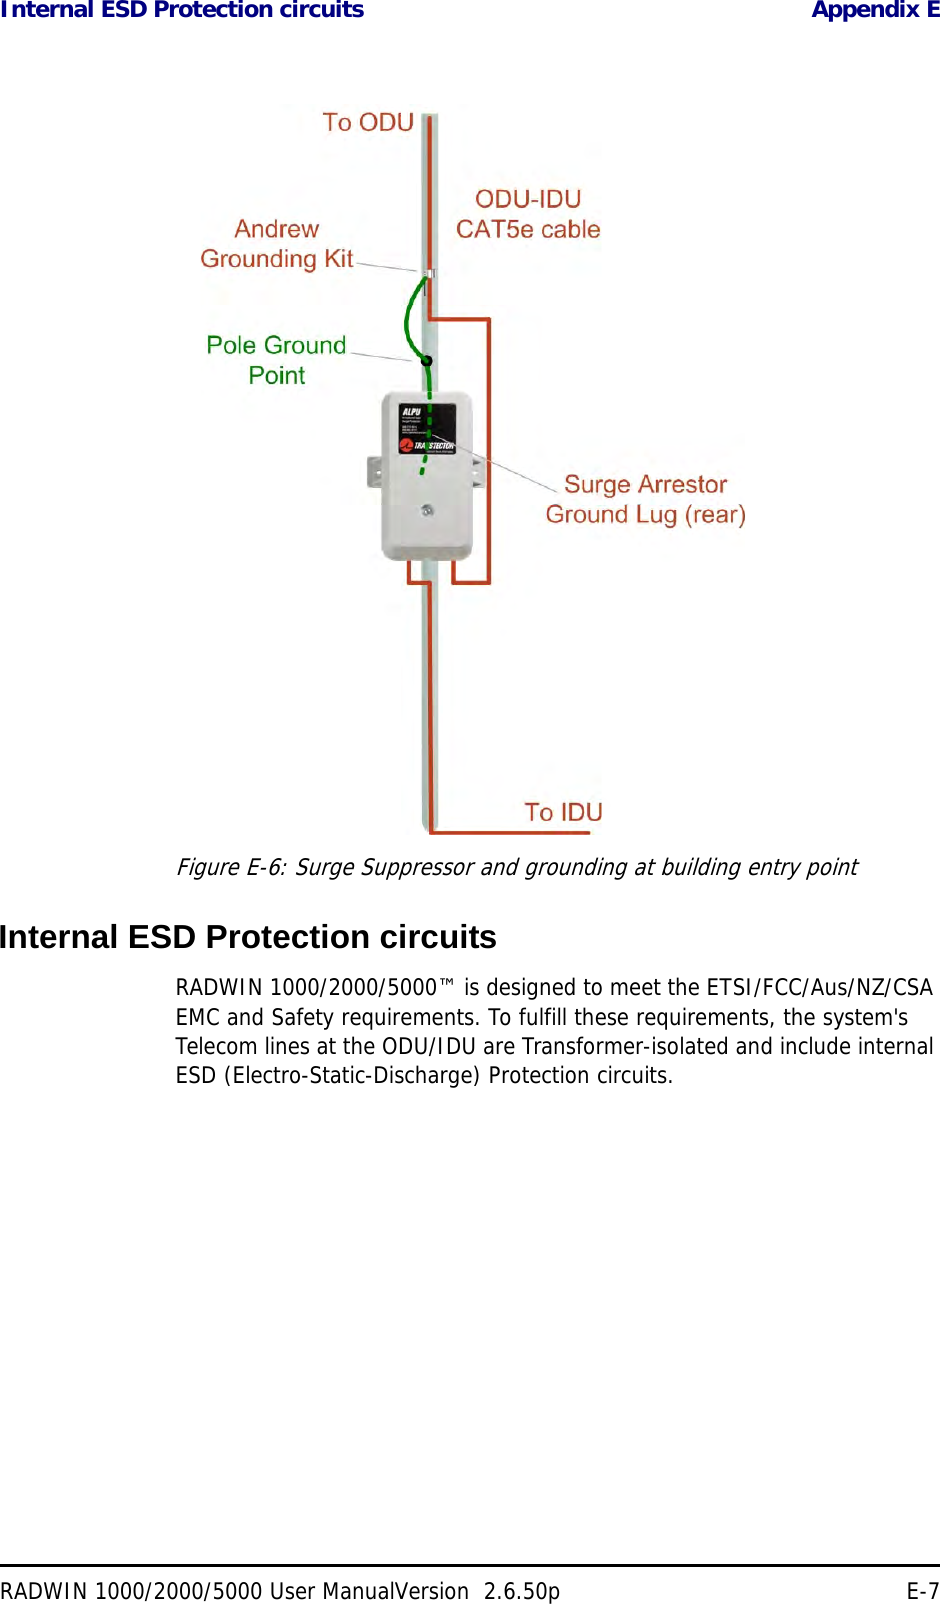 Internal ESD Protection circuits Appendix ERADWIN 1000/2000/5000 User ManualVersion  2.6.50p E-7Figure E-6: Surge Suppressor and grounding at building entry pointInternal ESD Protection circuitsRADWIN 1000/2000/5000™ is designed to meet the ETSI/FCC/Aus/NZ/CSA EMC and Safety requirements. To fulfill these requirements, the system&apos;s Telecom lines at the ODU/IDU are Transformer-isolated and include internal ESD (Electro-Static-Discharge) Protection circuits.